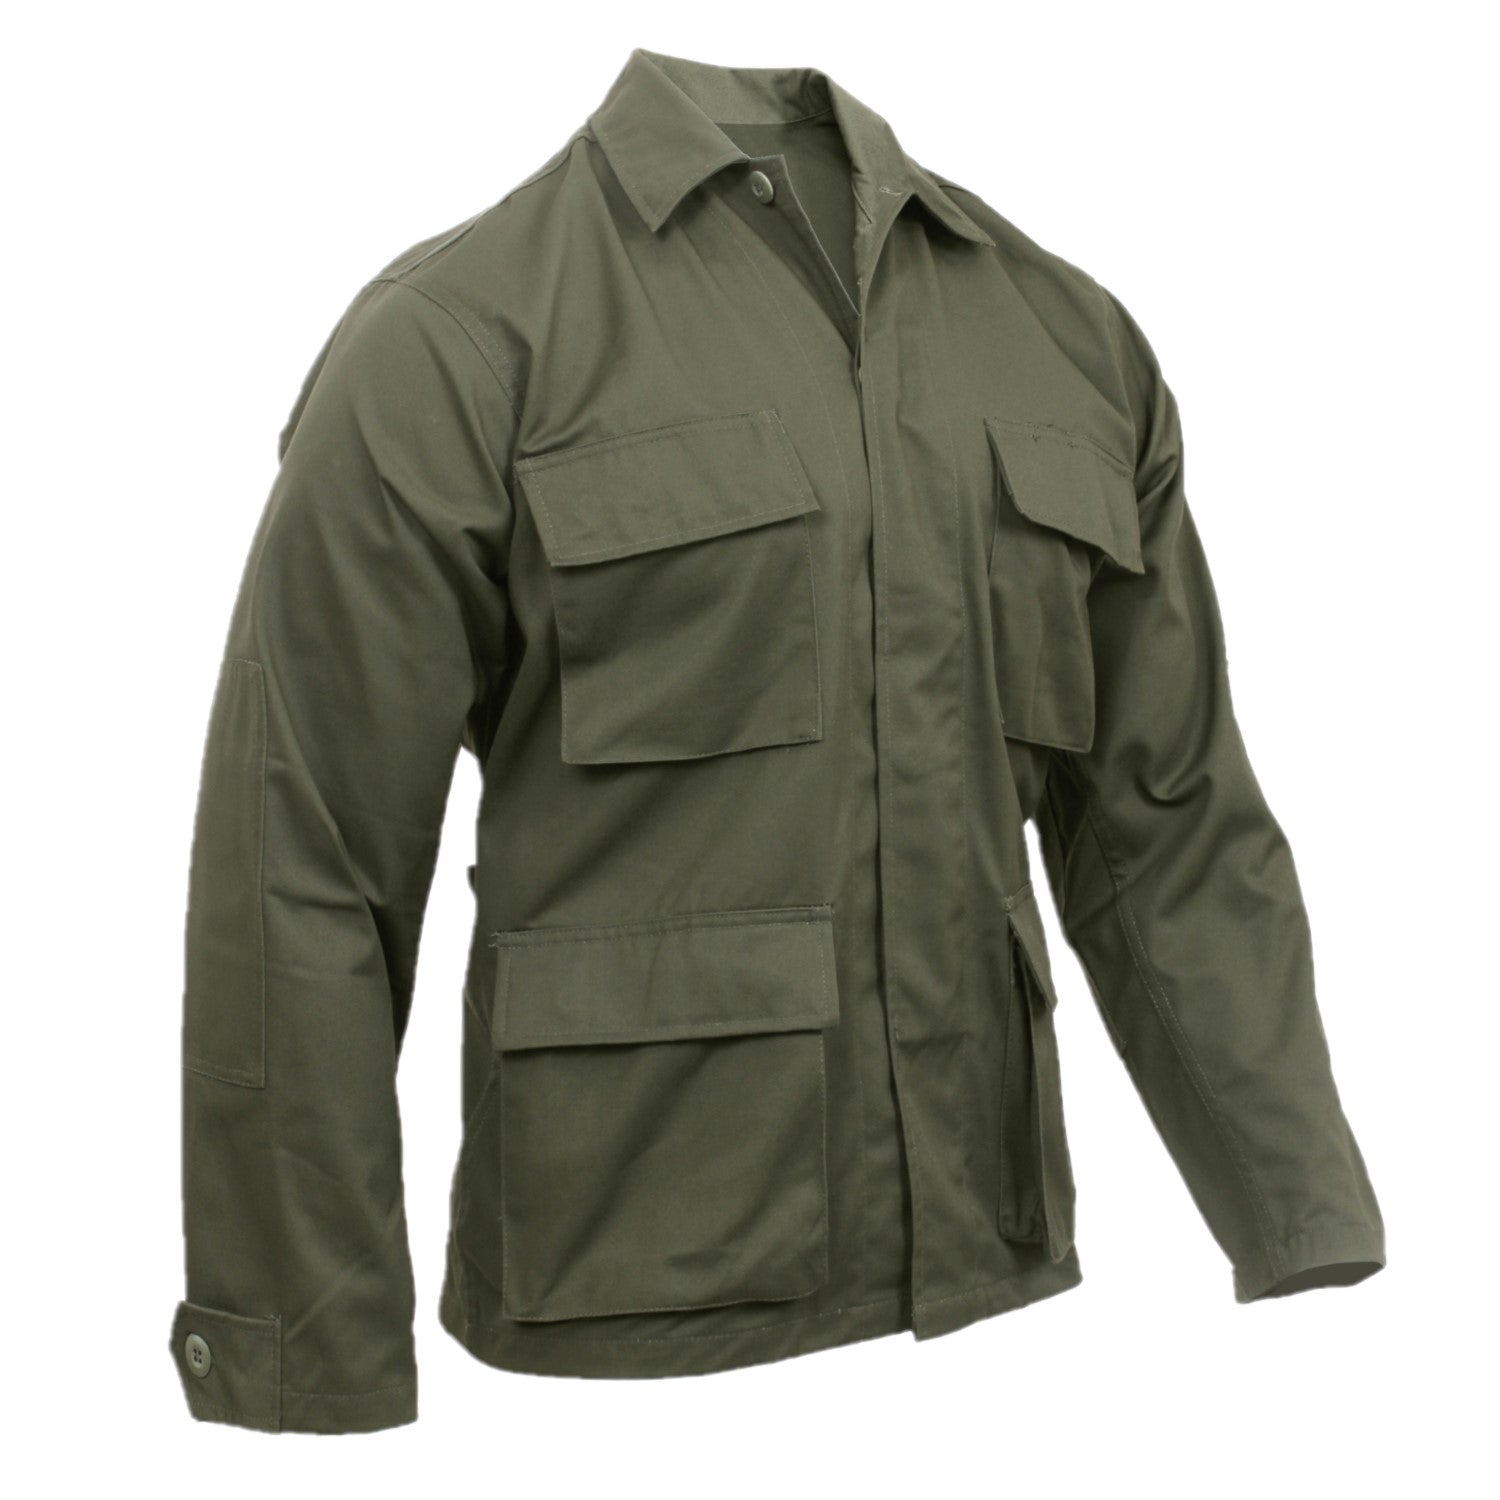 Military Spec BDU Shirt—Polycotton and Cotton – McGuire Army Navy